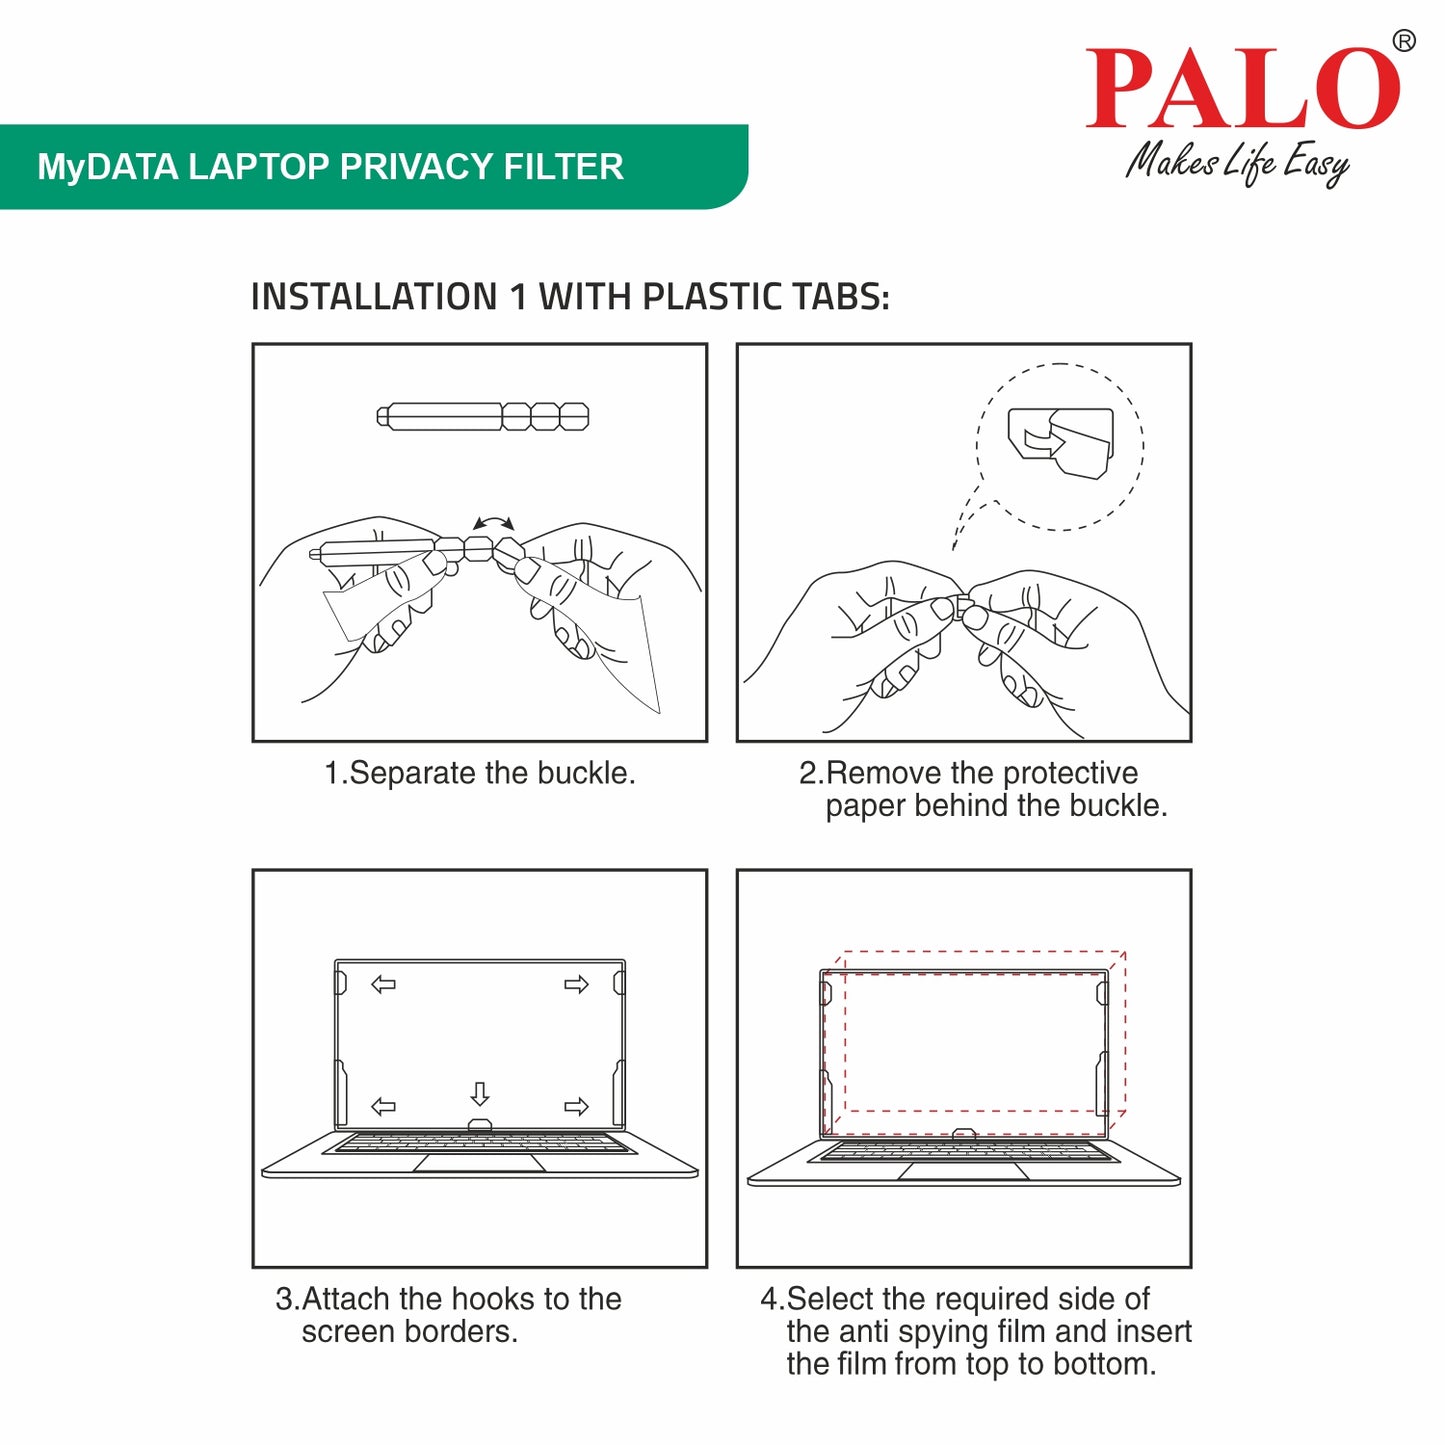 PALO MyDATA Widescreen Privacy Filter for Laptops